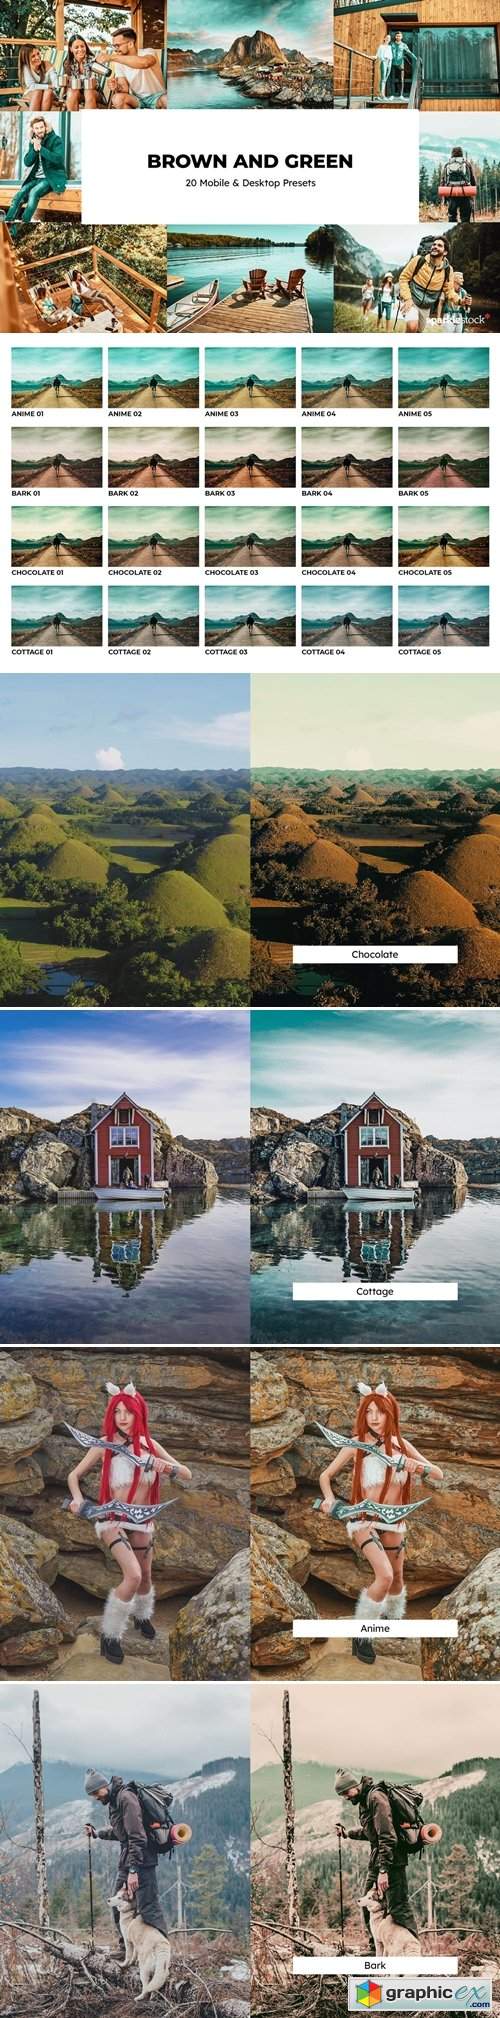  20 Brown and Green Lightroom Presets and LUTs 